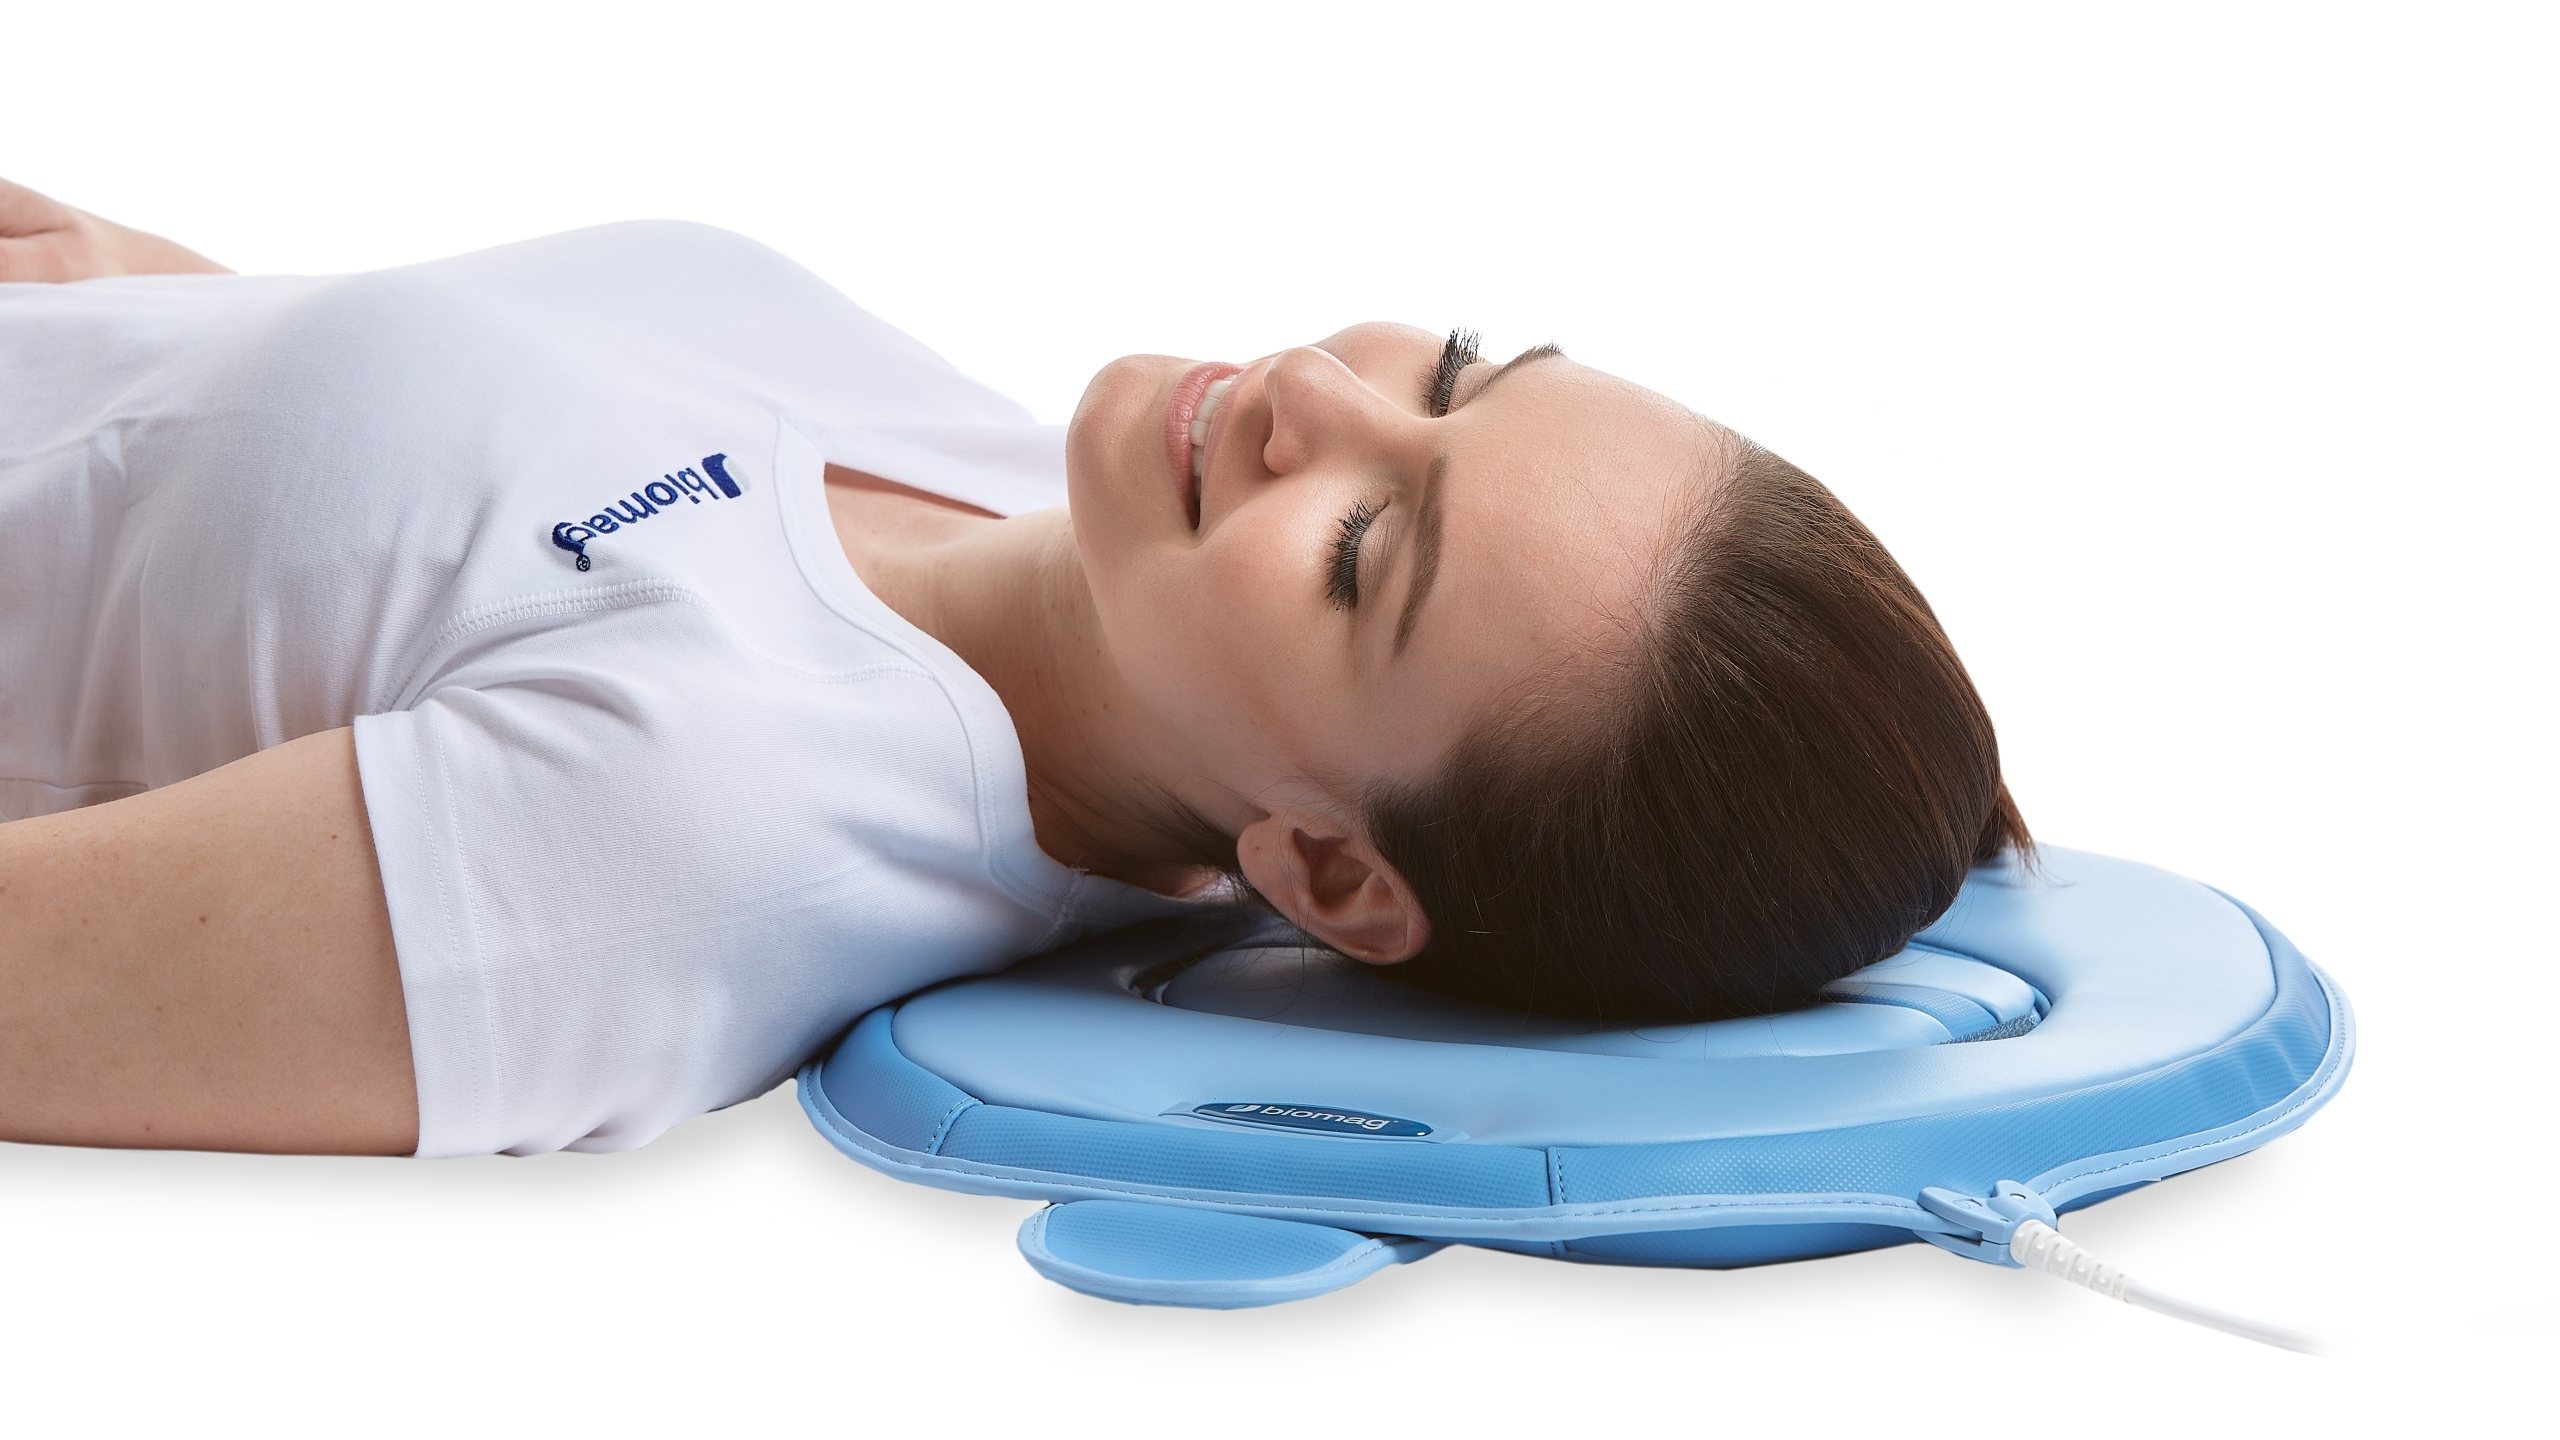 Comfortable applicaions of magnetic therapy using the A8P applicator for issues in the back, cervical spine and head areas.